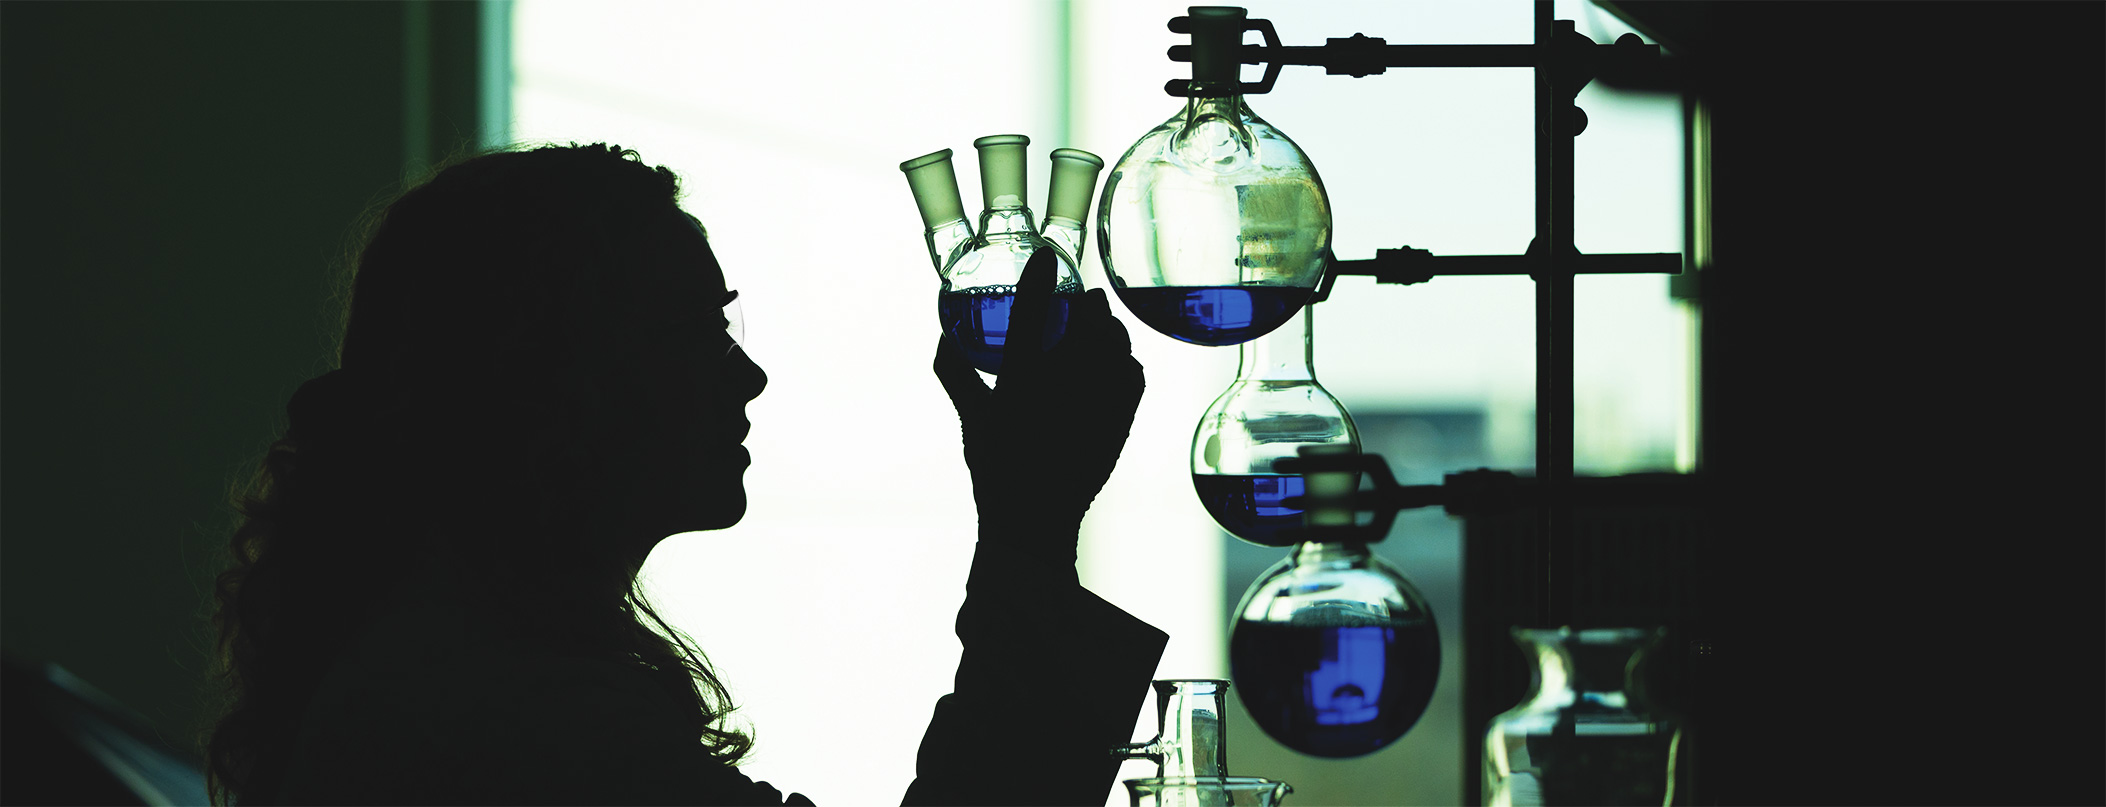 student holding flask in lab setting